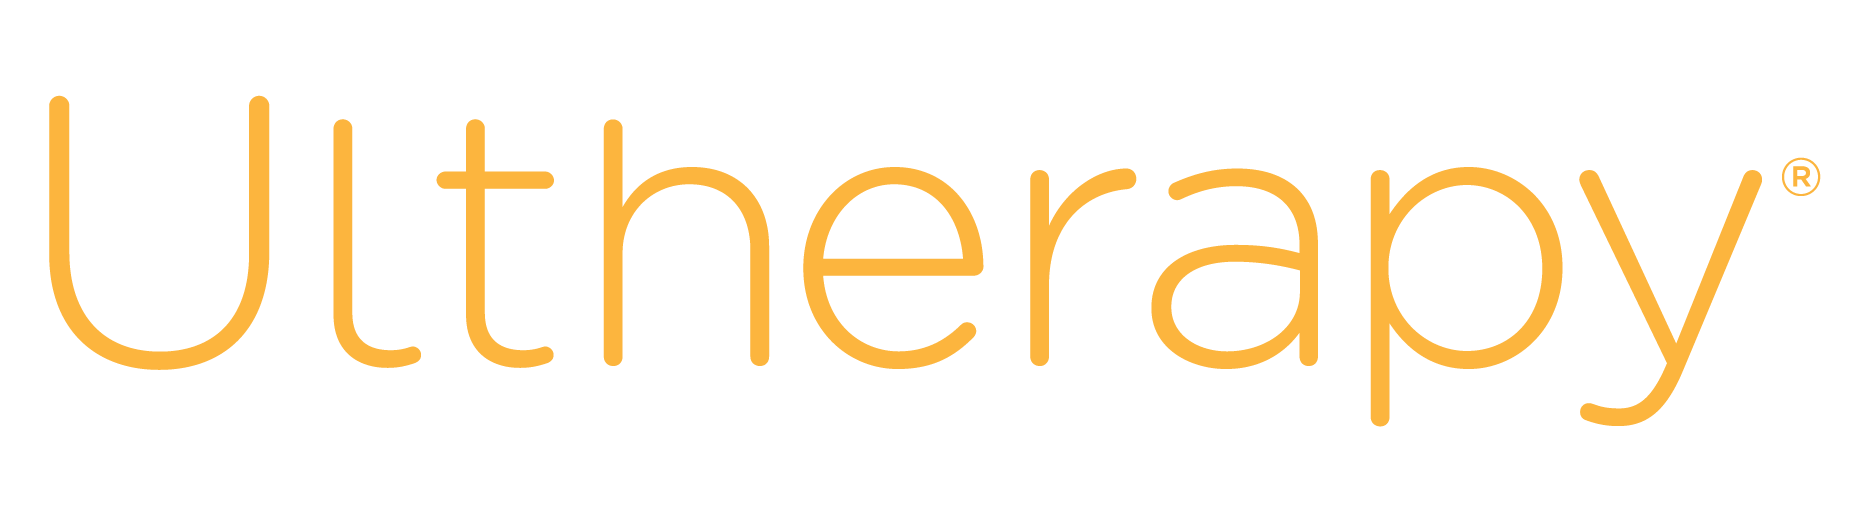 Ultherapy(MERZ)